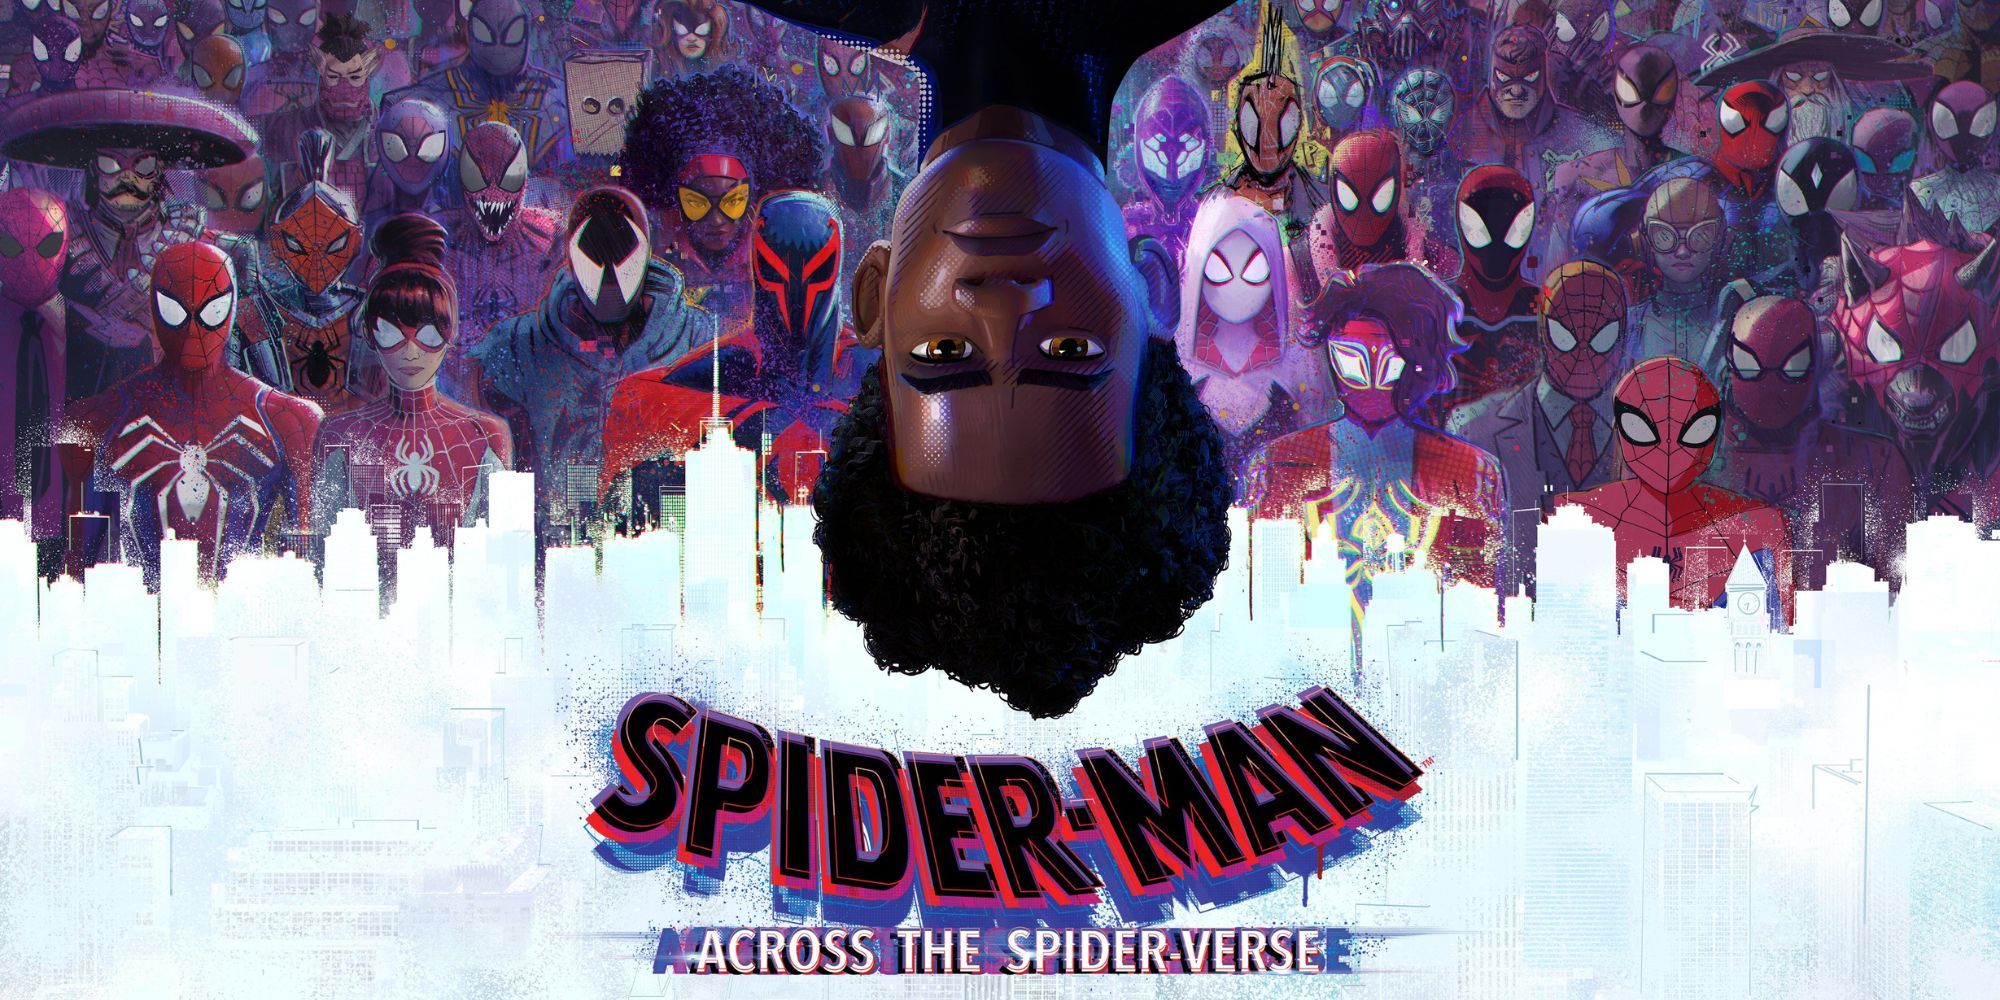 The different Spider-Variants in Spider-Man: Across the Spider-Verse